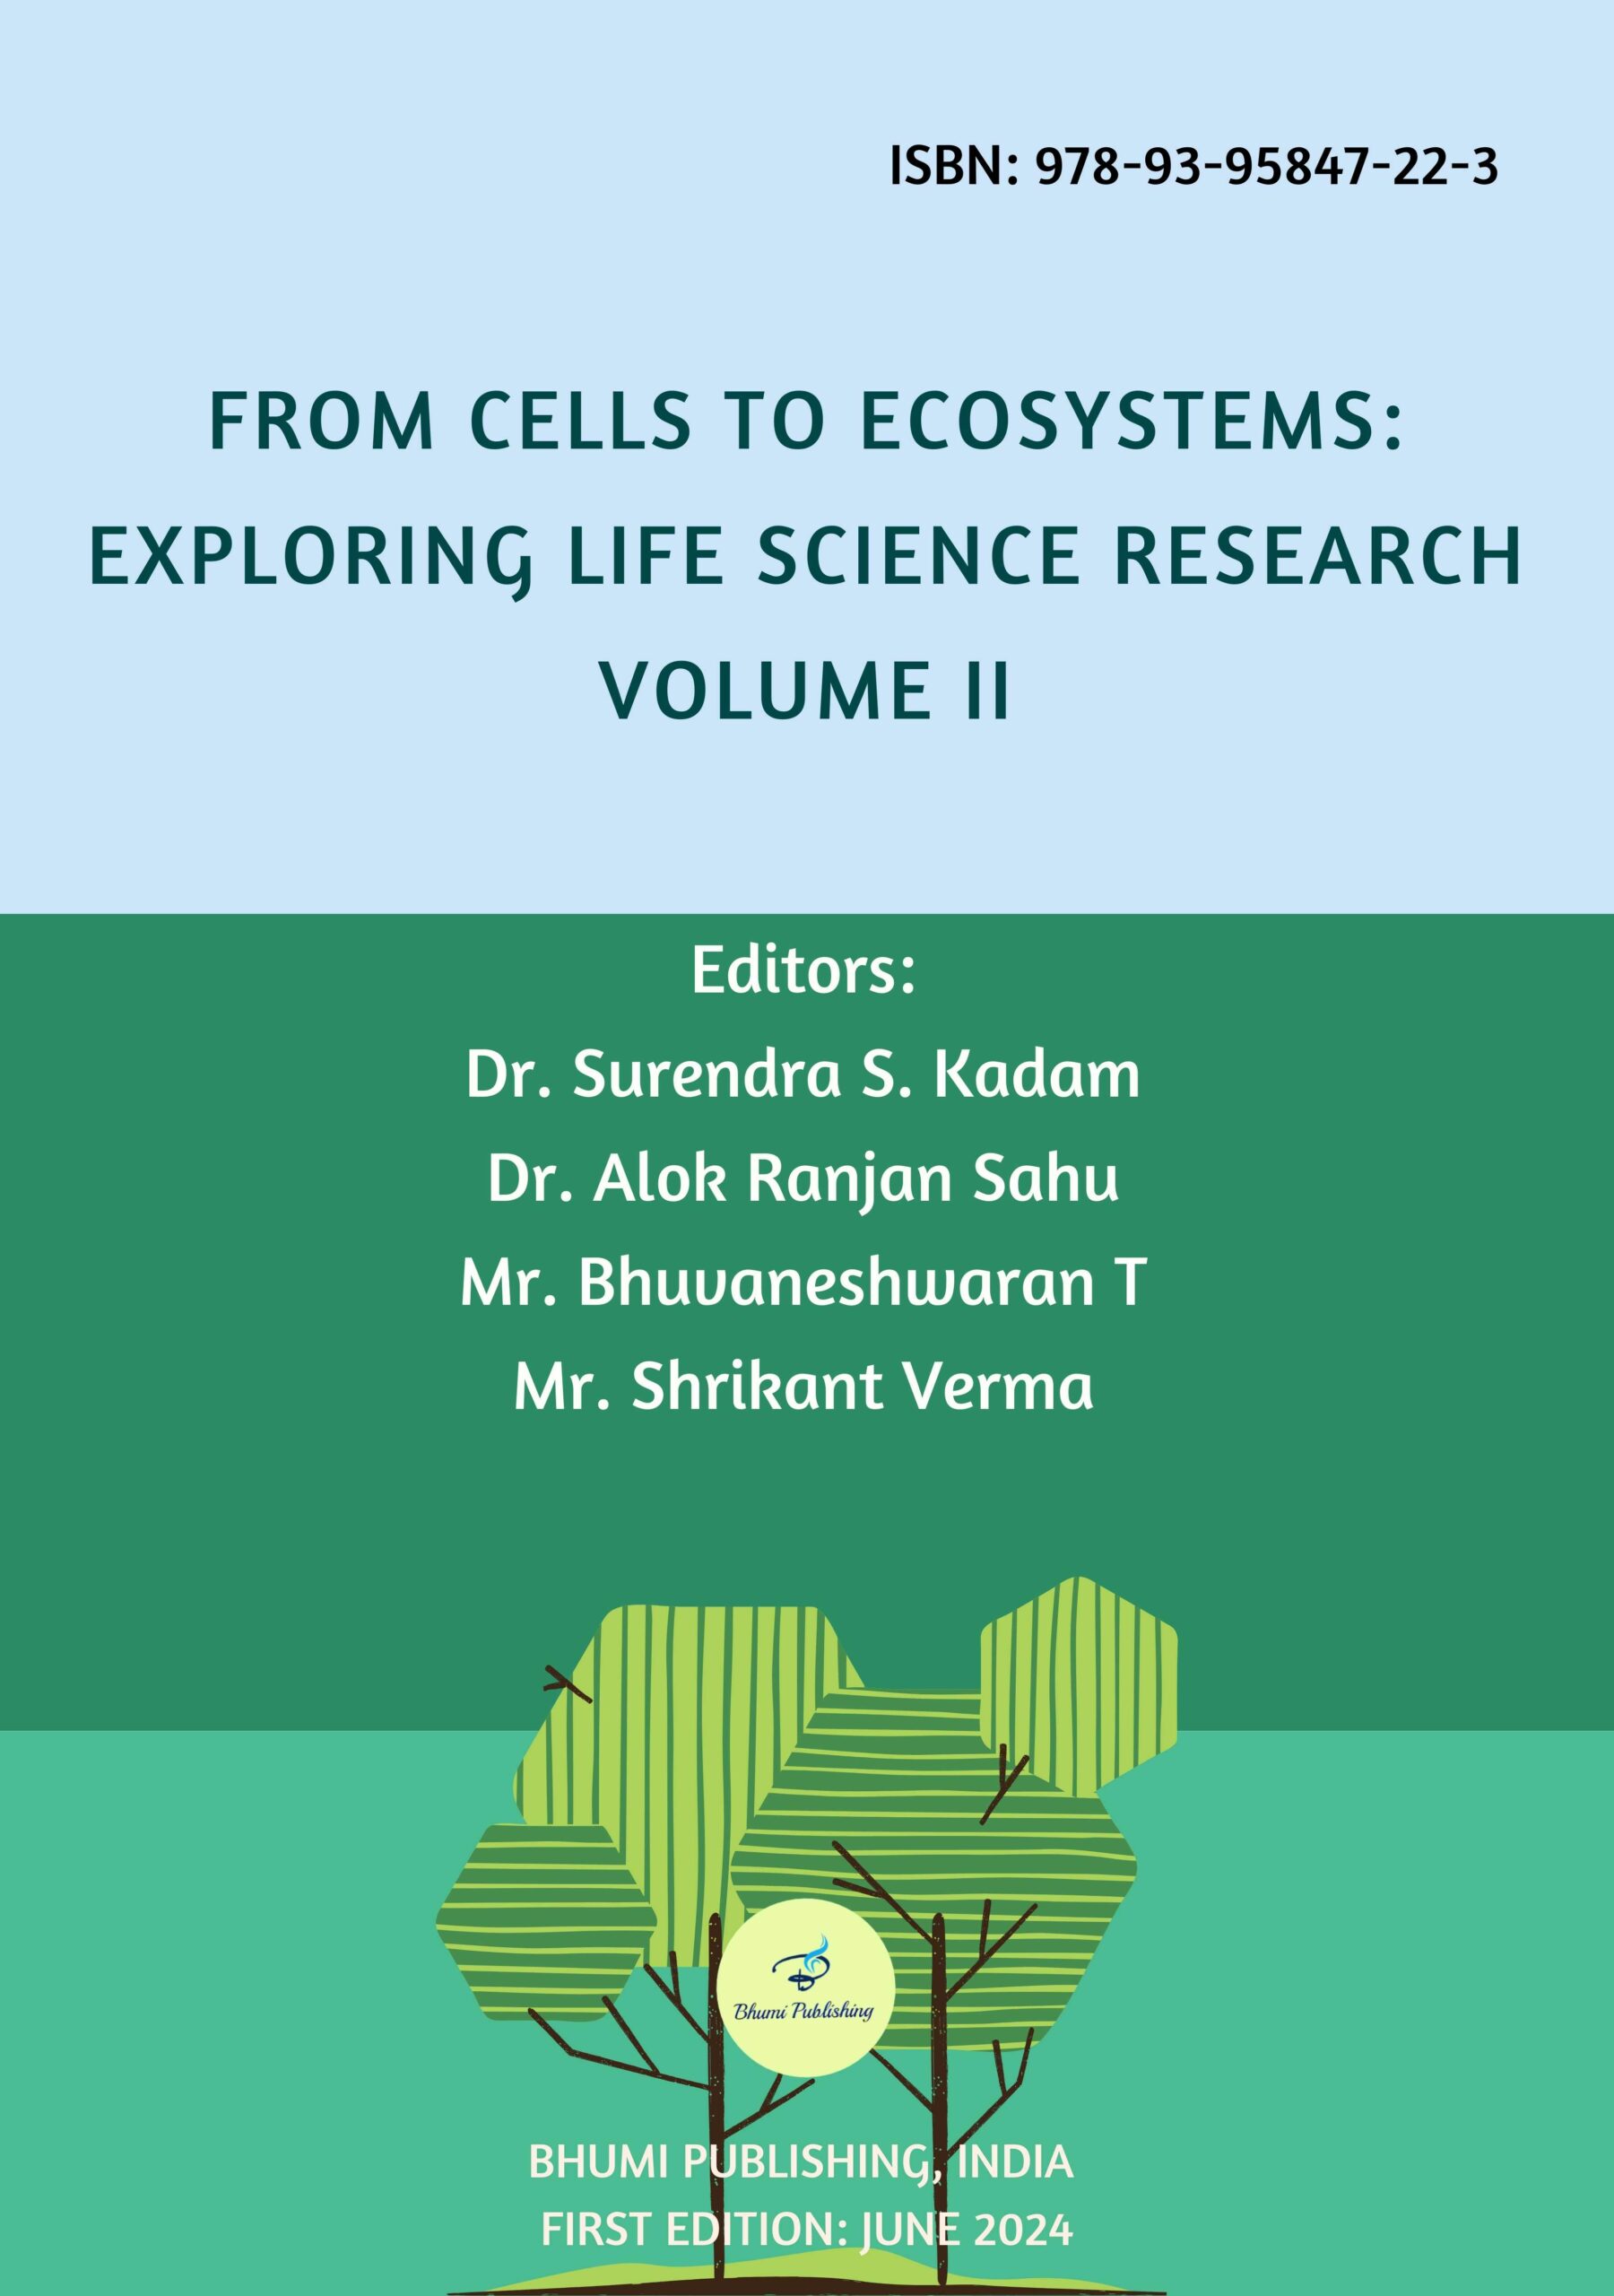 From Cells to Ecosystems: Exploring Life Science Research Volume II